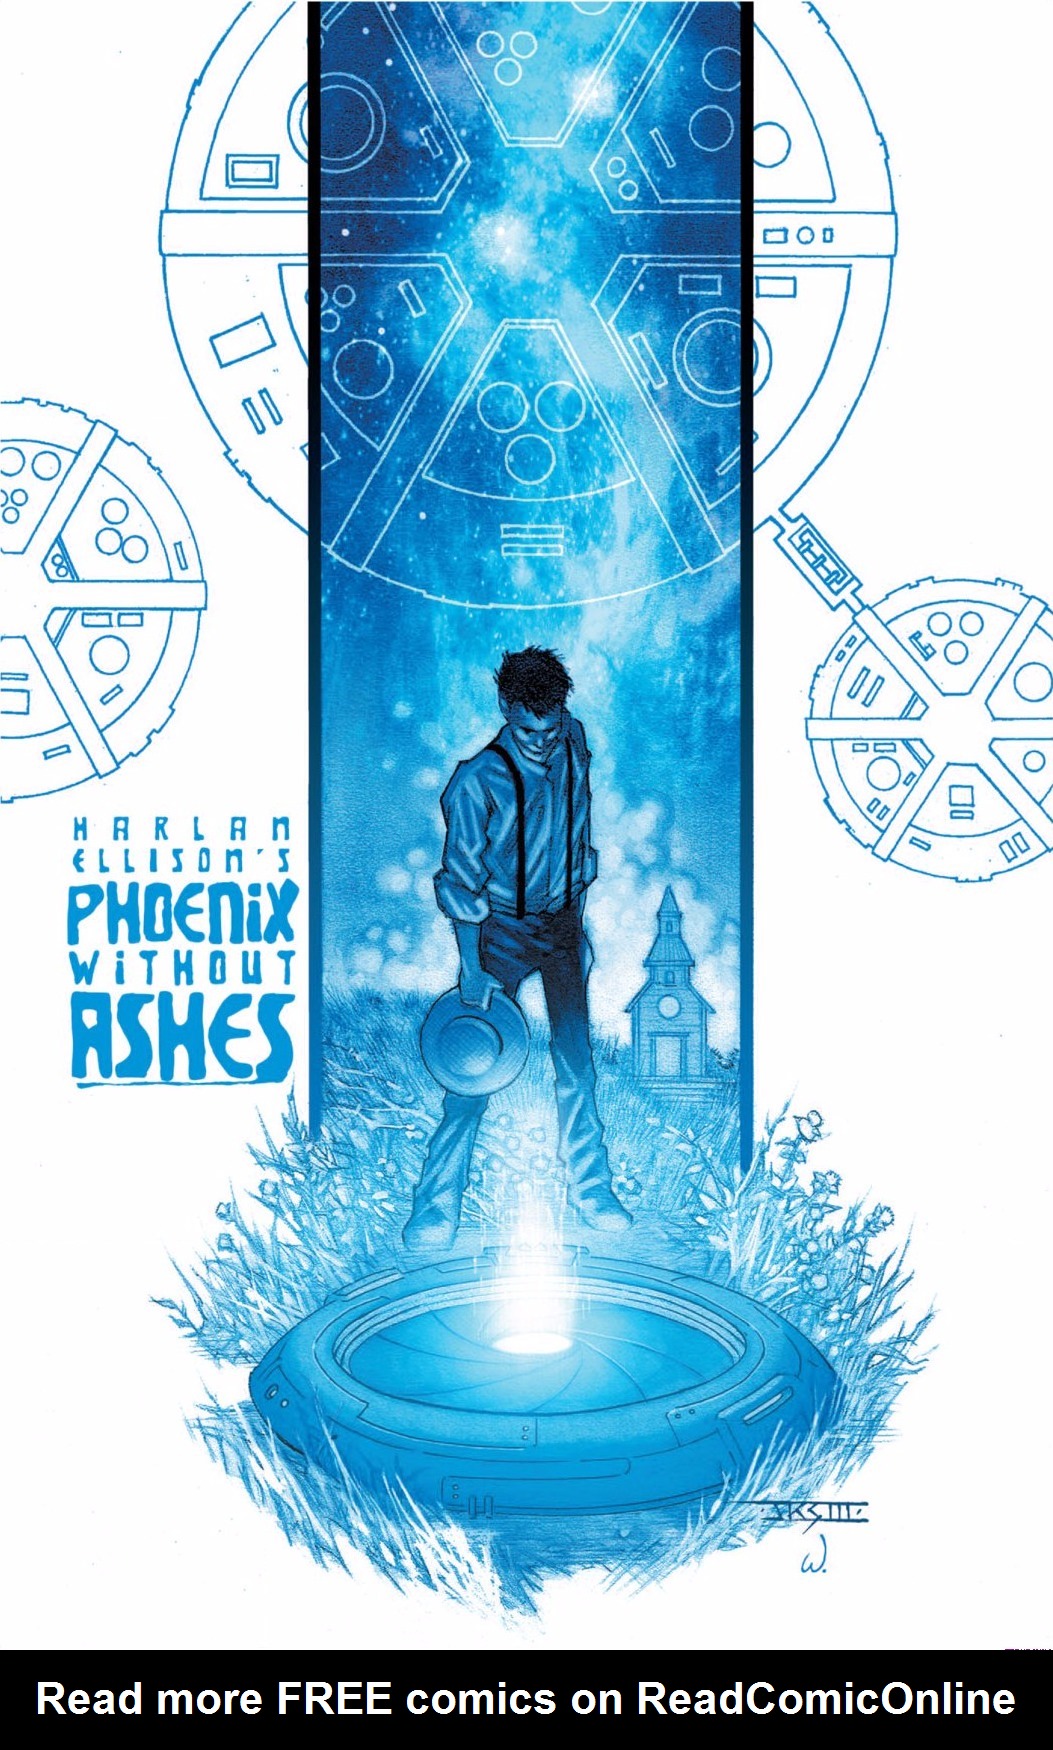 Read online Phoenix Without Ashes comic -  Issue # TPB - 1